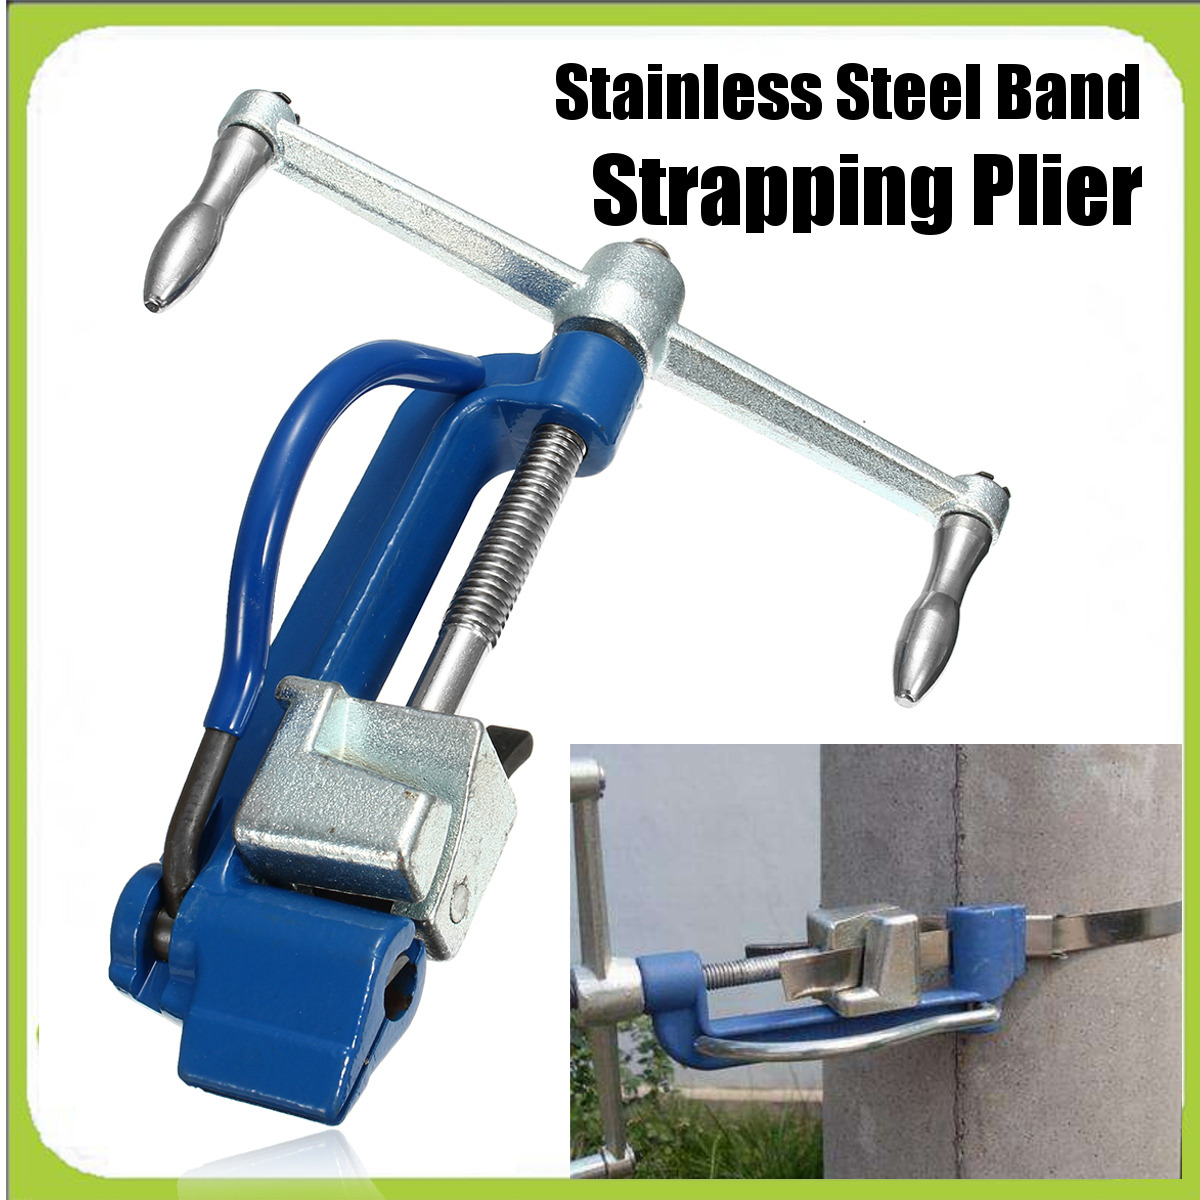 Band-Strapping-Pliers-Tool-Strapper-WrapperPacker-Manual-BindingWrapping-Metal-Tie-Cutting-Tool-1338670-1